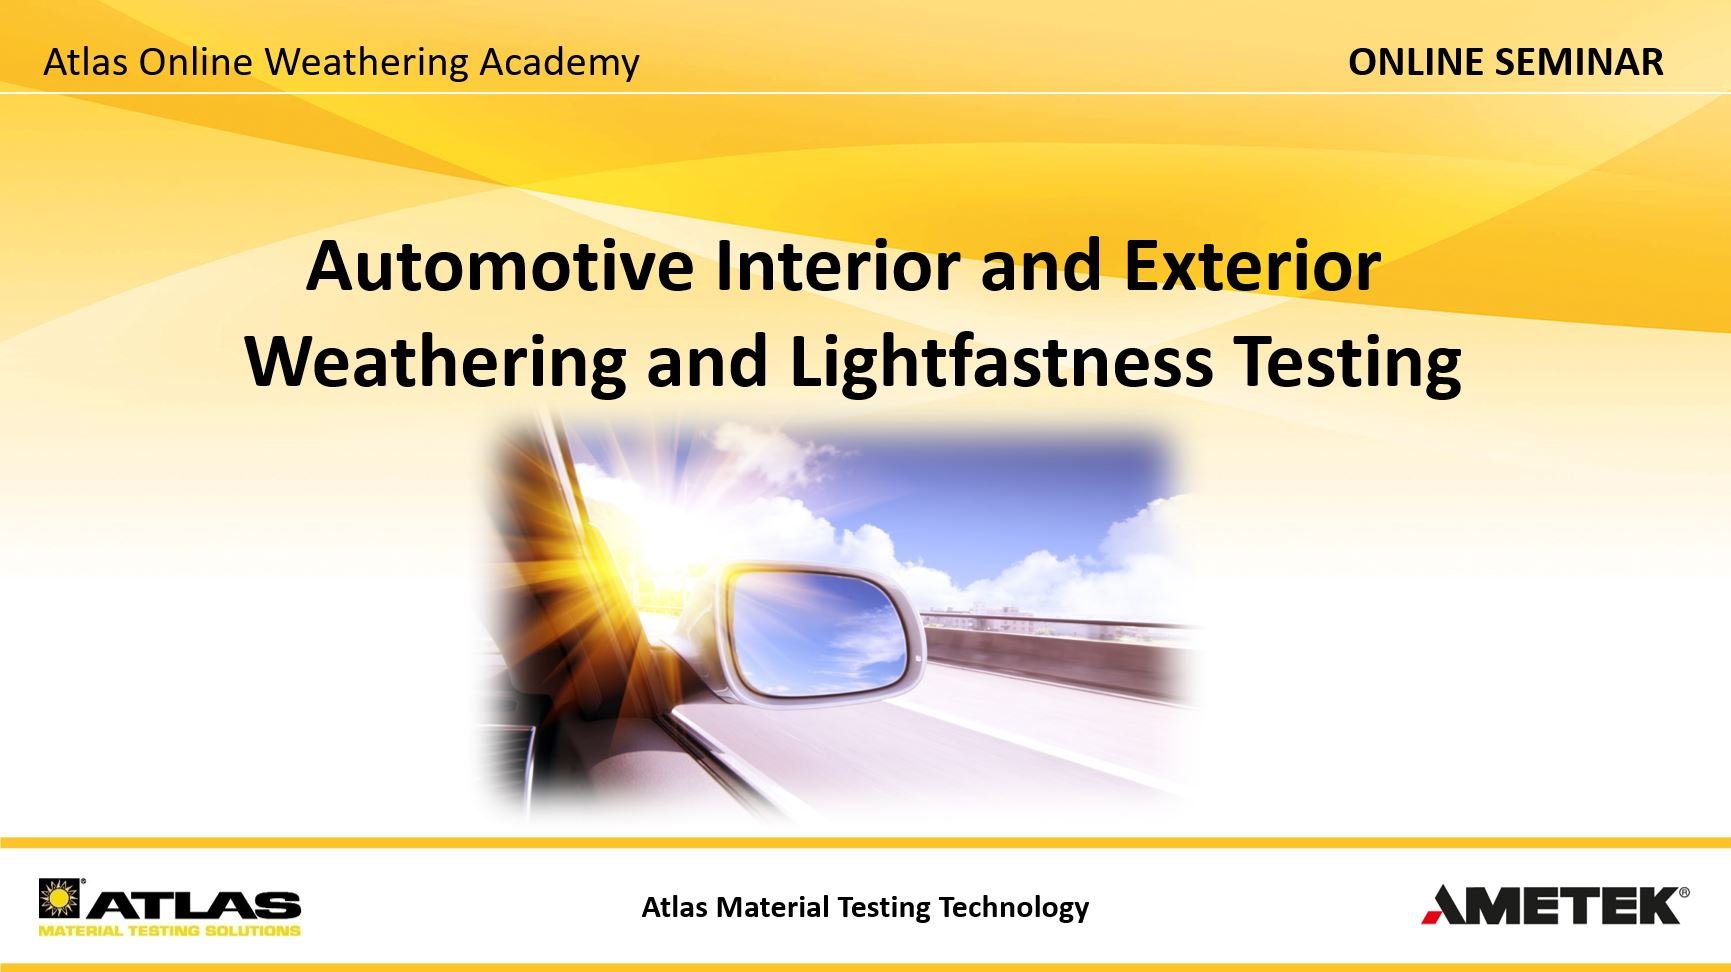 16-9 Online Seminar-Cover-Automotive-Interior-and-Exterior-Weathering-and-Lightfastness-Testing AR-2021-08-10